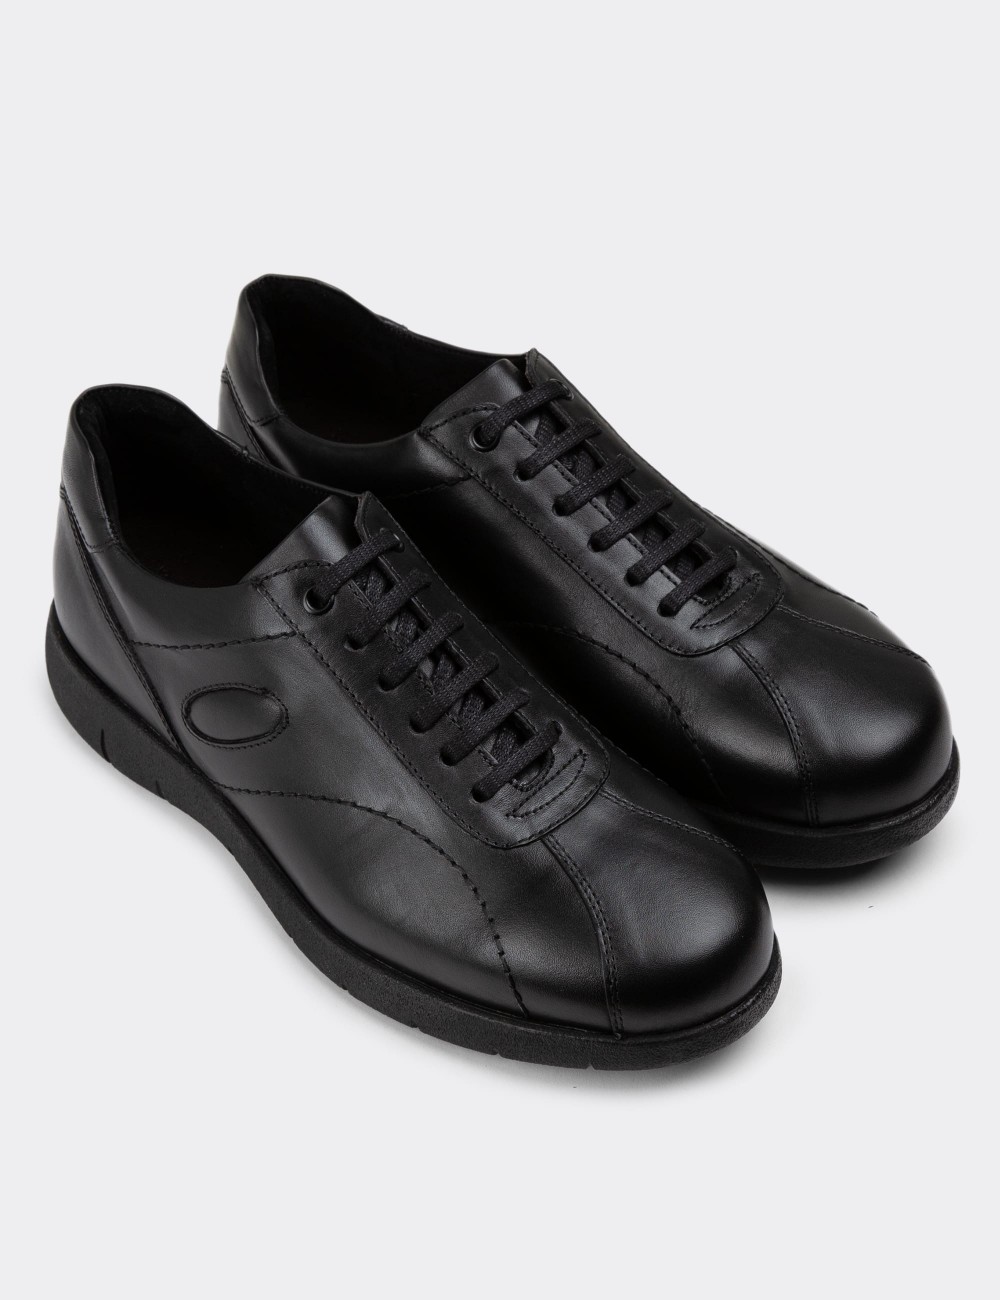 Black Leather Lace-up Shoes - 01945MSYHC01